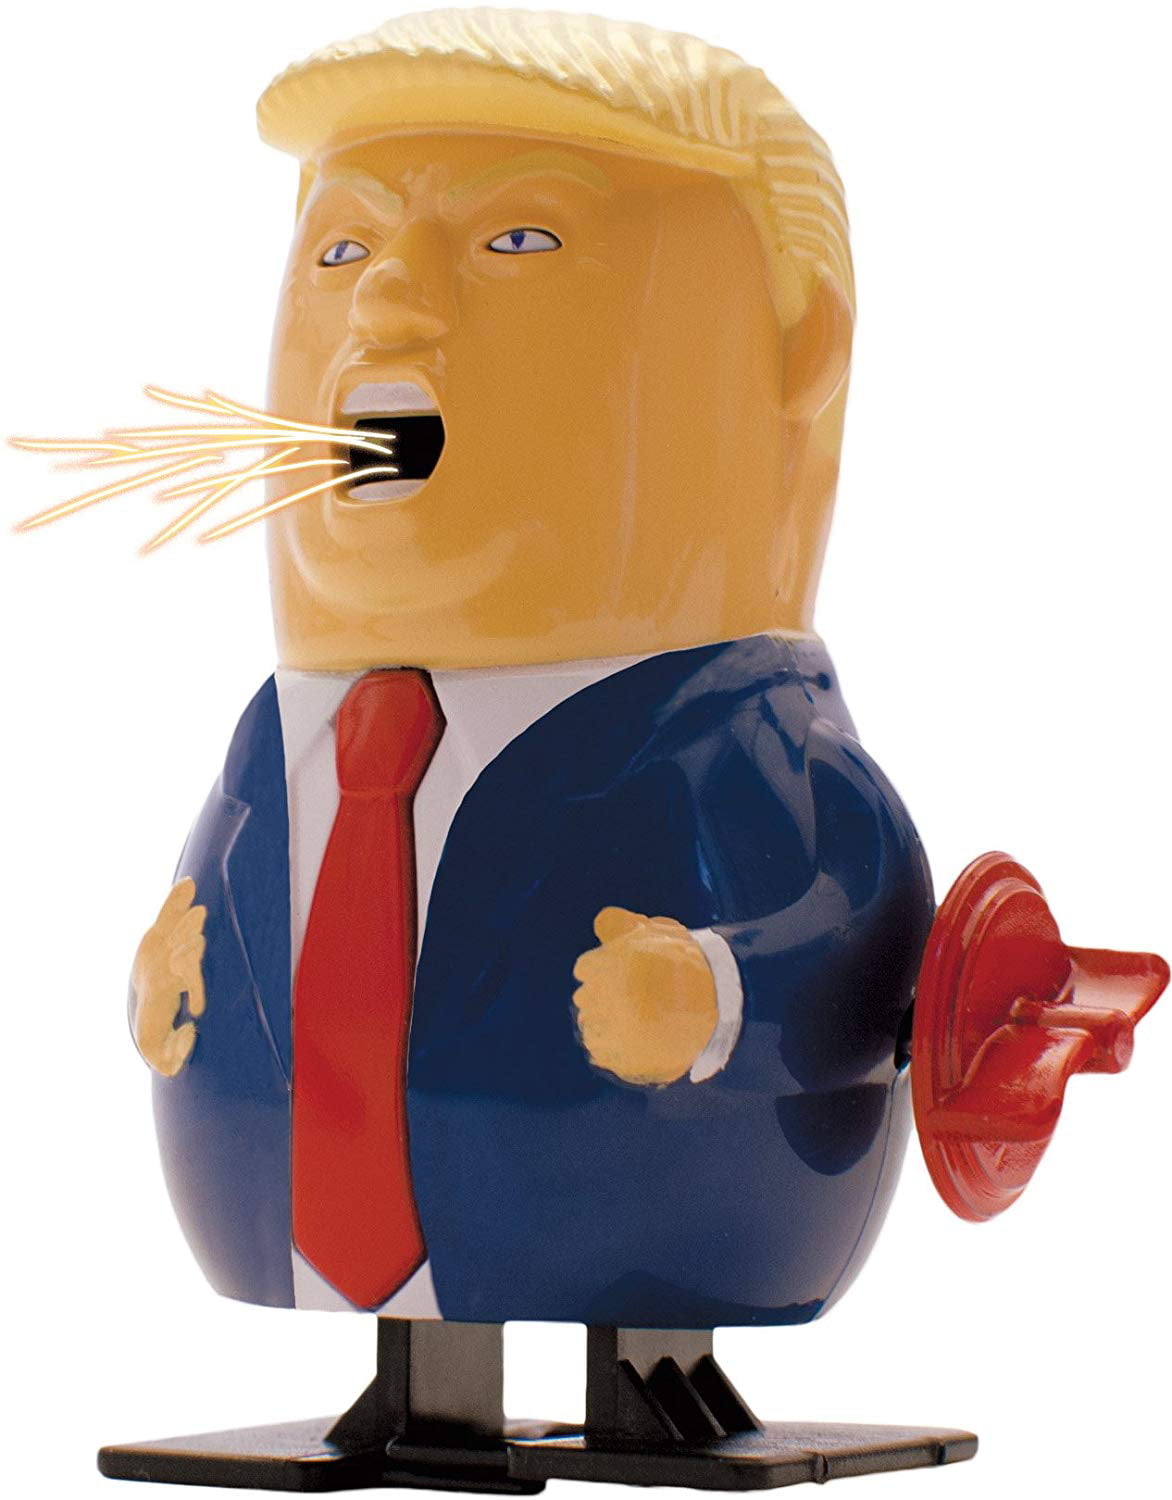 Trumpzilla Walking Sparking Wind up Donald Trump Action Figure Toy for sale online 